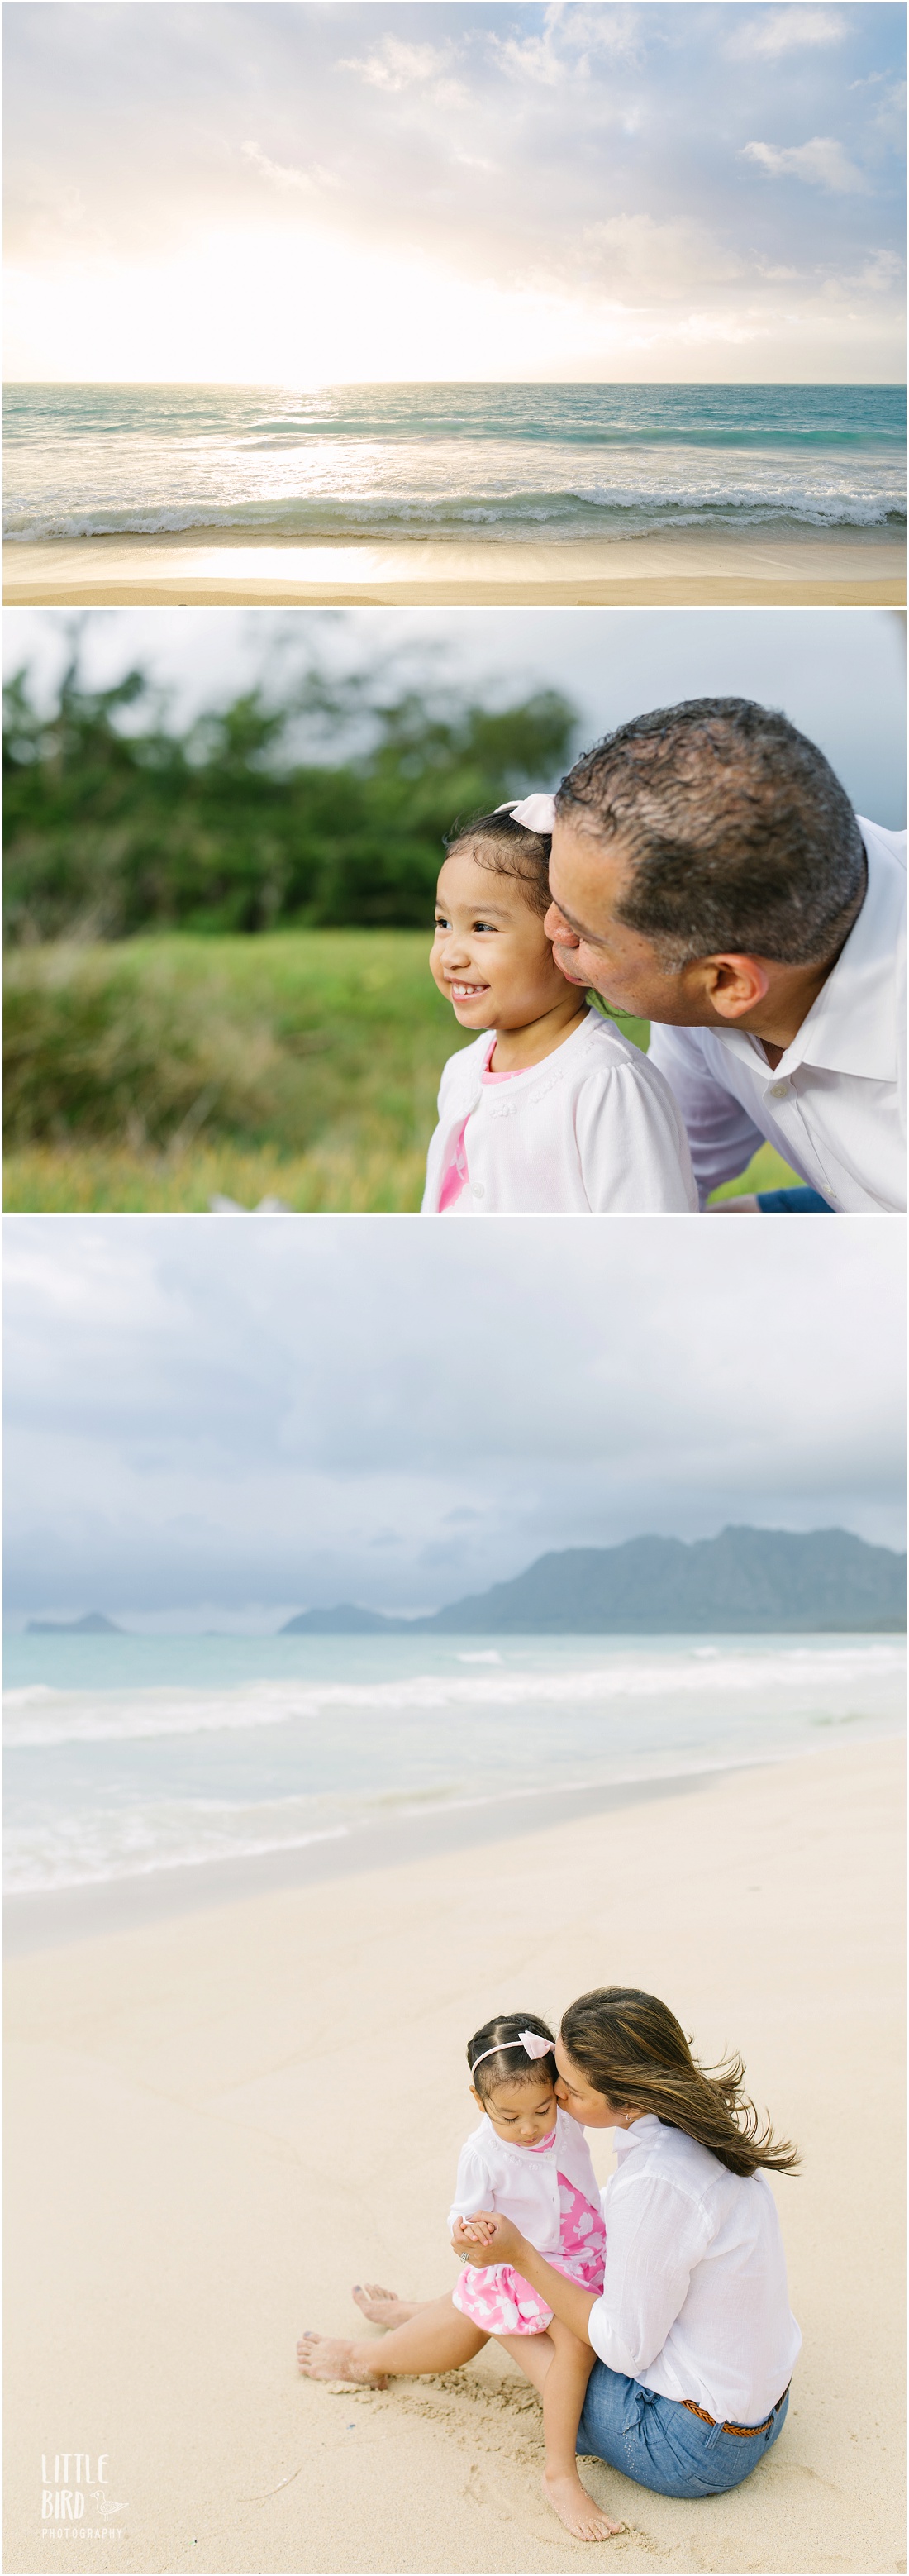 beach portraits for a family on vacation